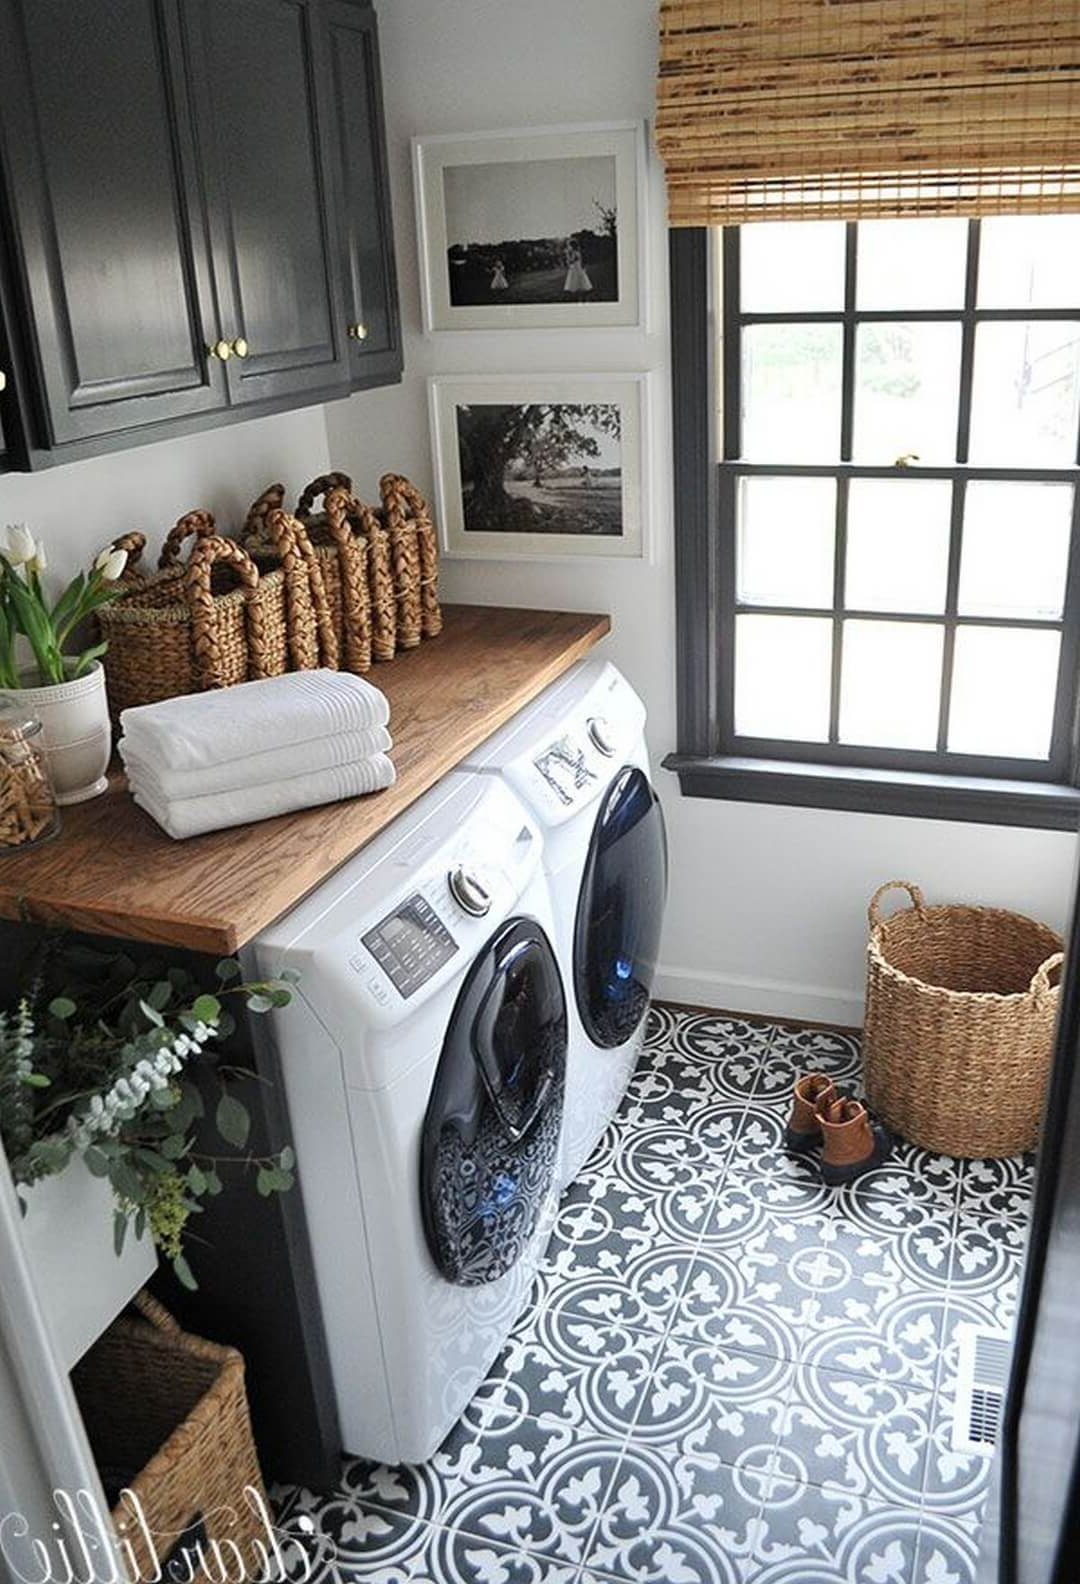 28 Best Small Laundry Room Design Ideas For 2020